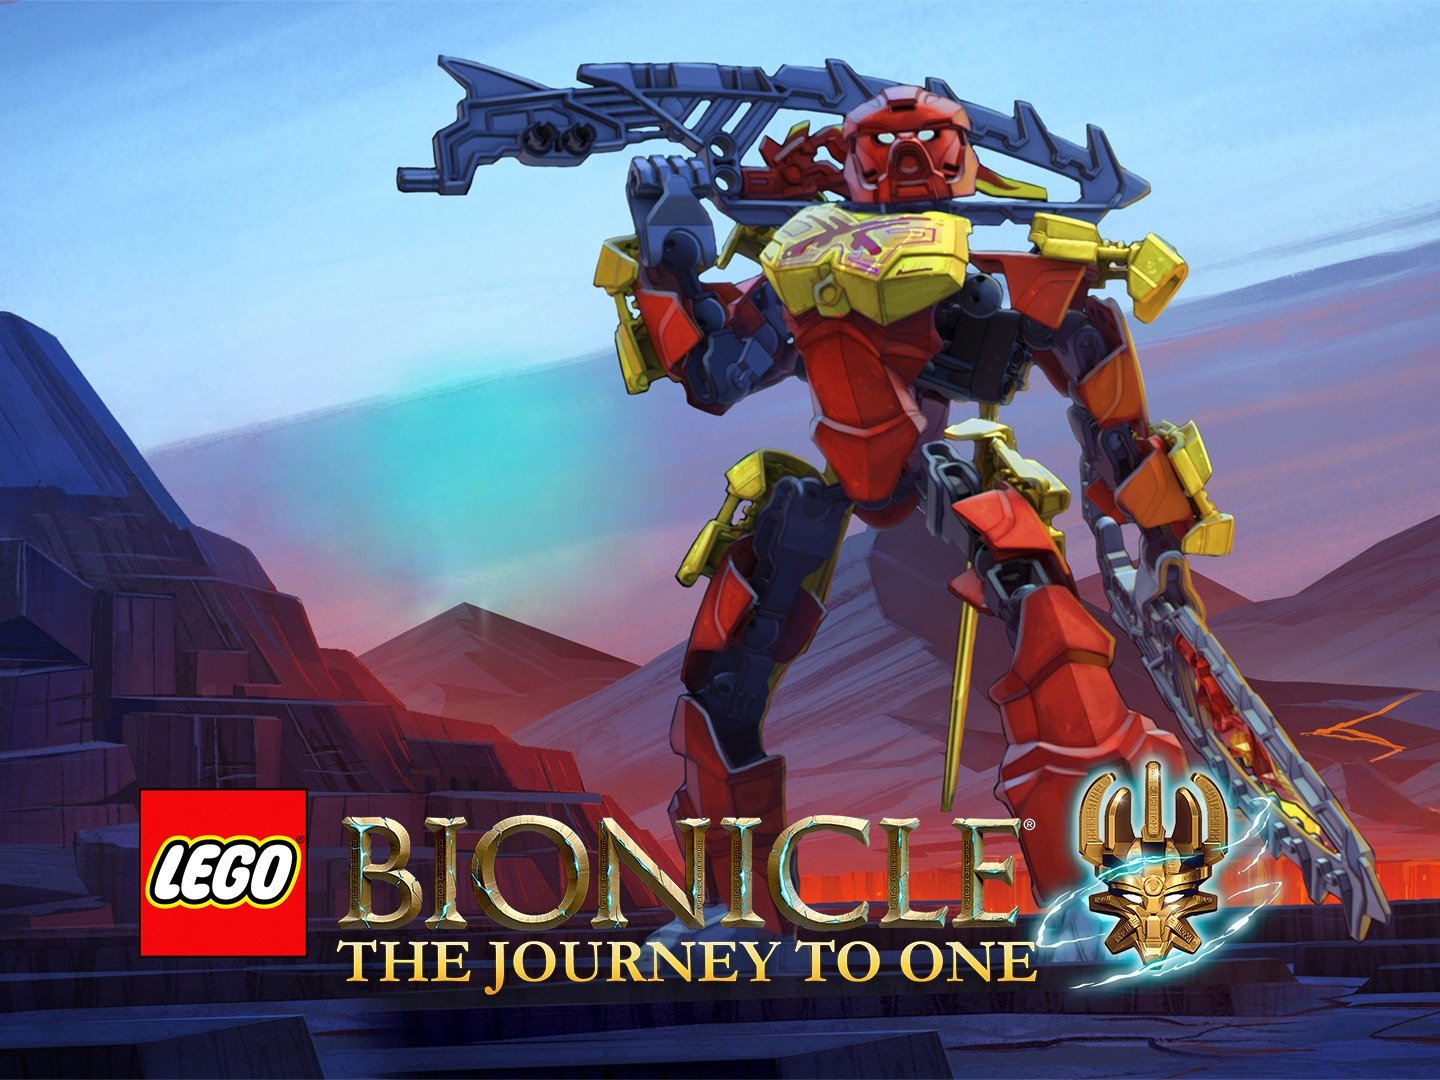 Bionicle but what if anime? - Artwork - The TTV Message Boards